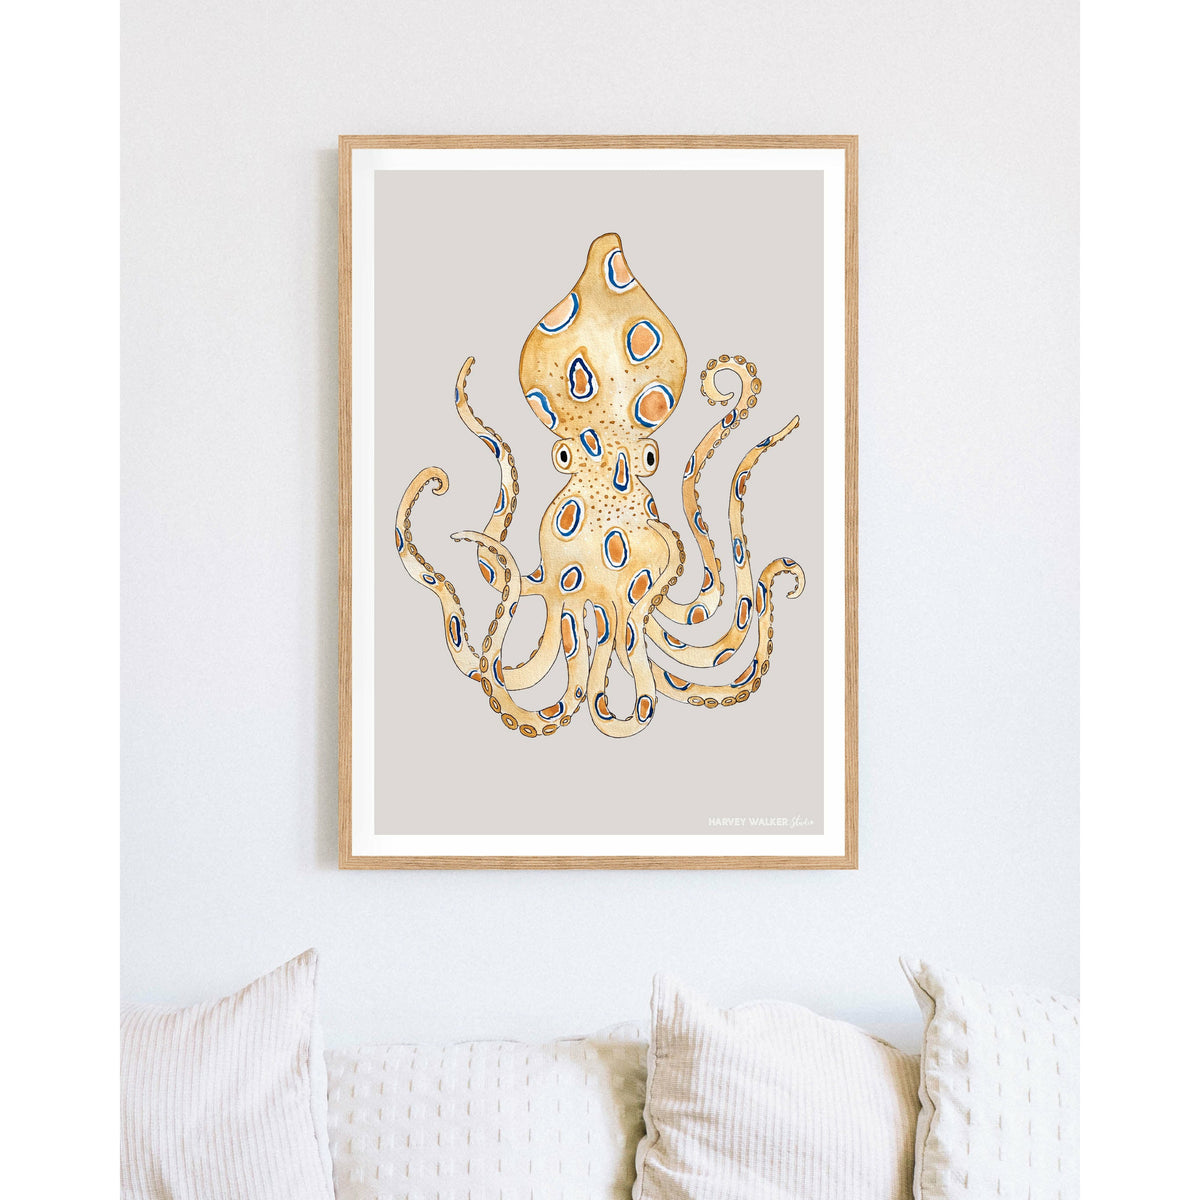 Different coastal art. This warm coloured print with grey background and blue ring octopus as the main feature will bring a coastal vibe to your living room.